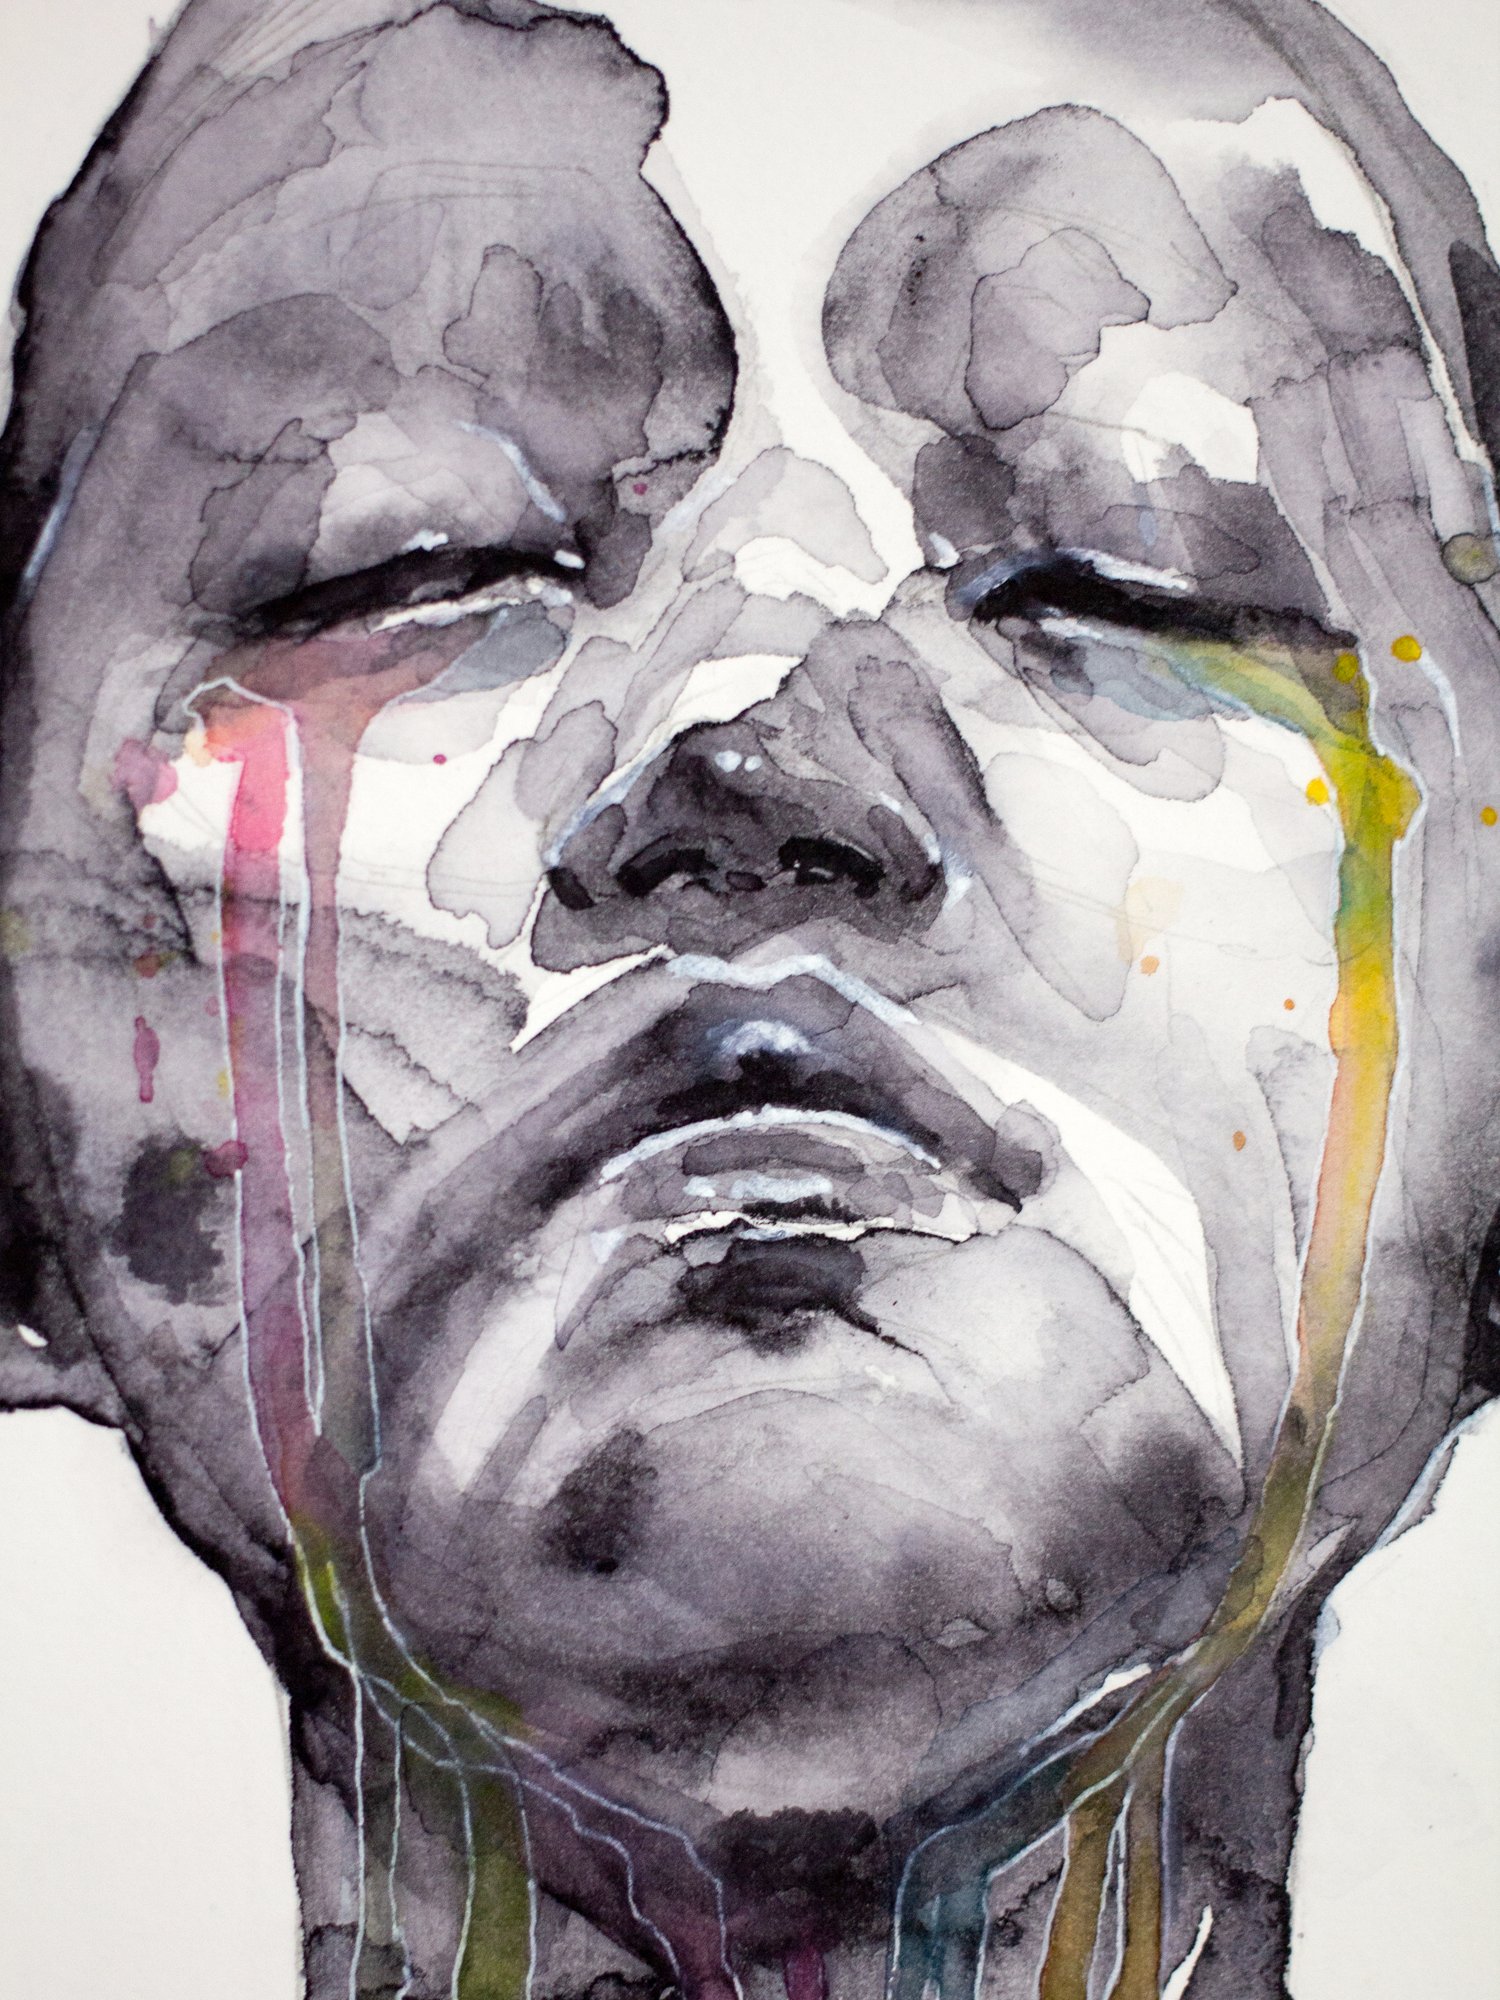 Agnes-Cecile weeping stone (30x40 cm)